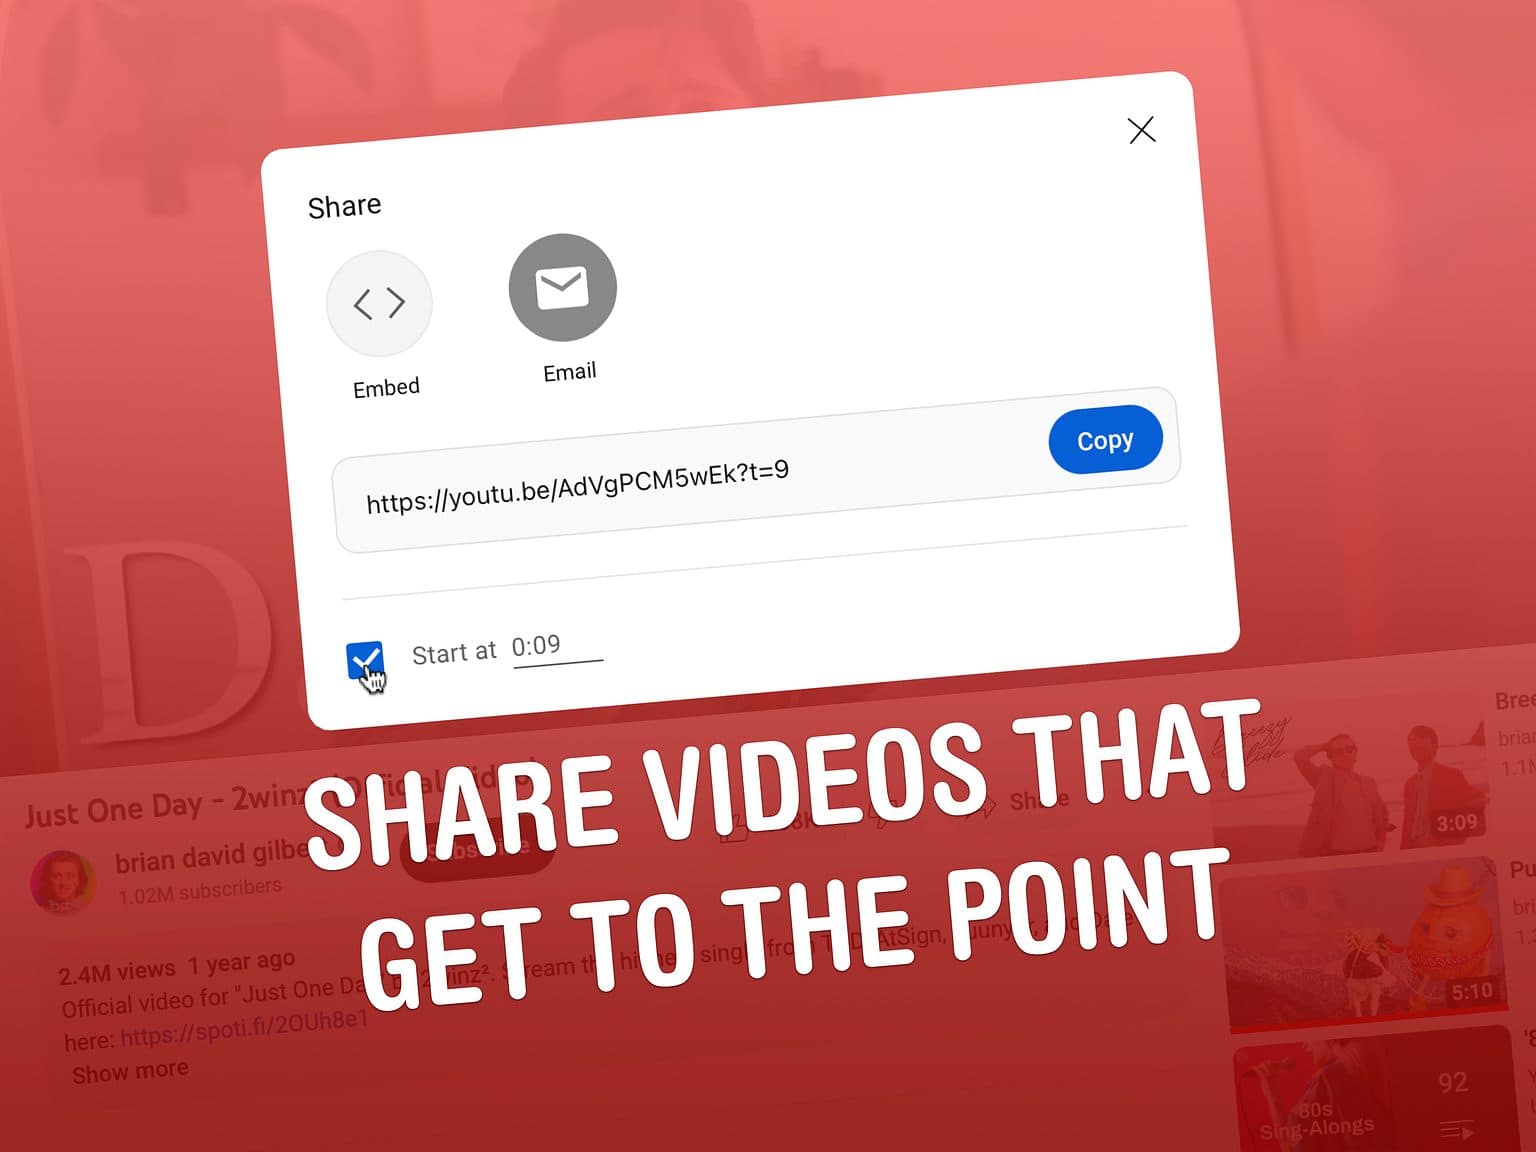 Share videos that get to the point.